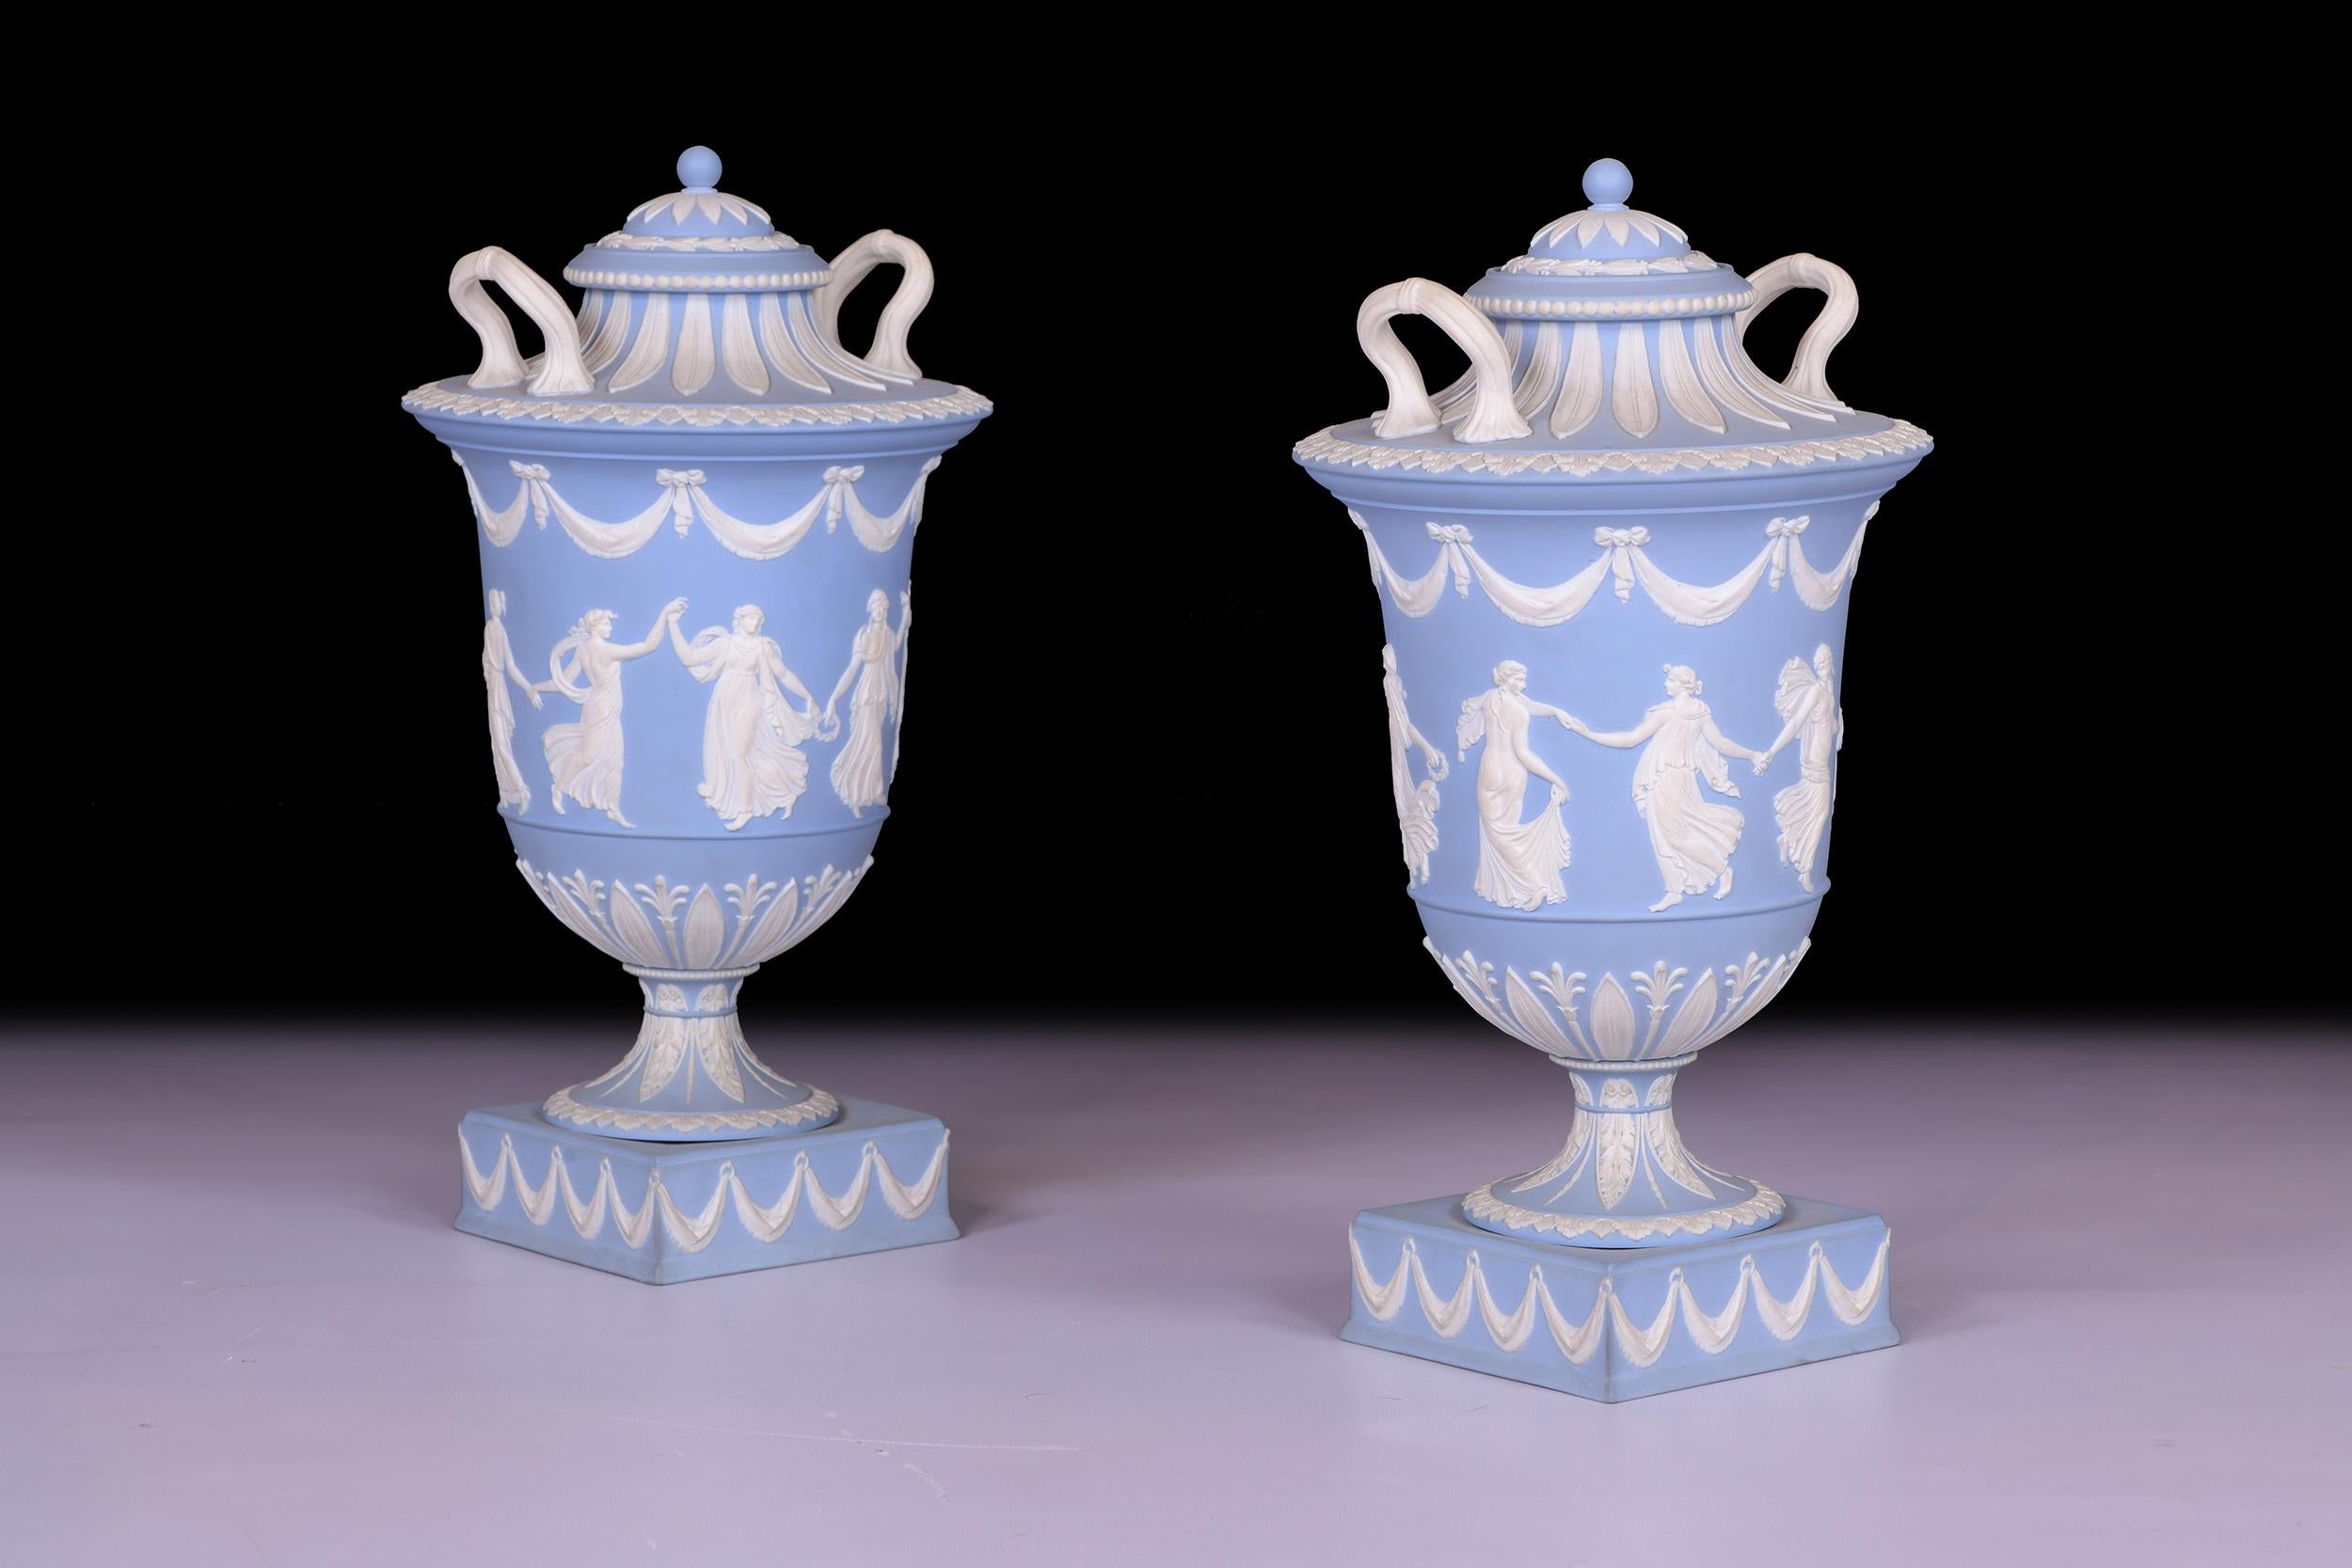 Most impressive pair of jasperware vases and covers from Wedgwood in the Neoclassical style. Composed of a baluster form, the shoulder is flanked by twin loop scroll handles, with spire finial radiating stiff-leaf tips covers the form. Neoclassical